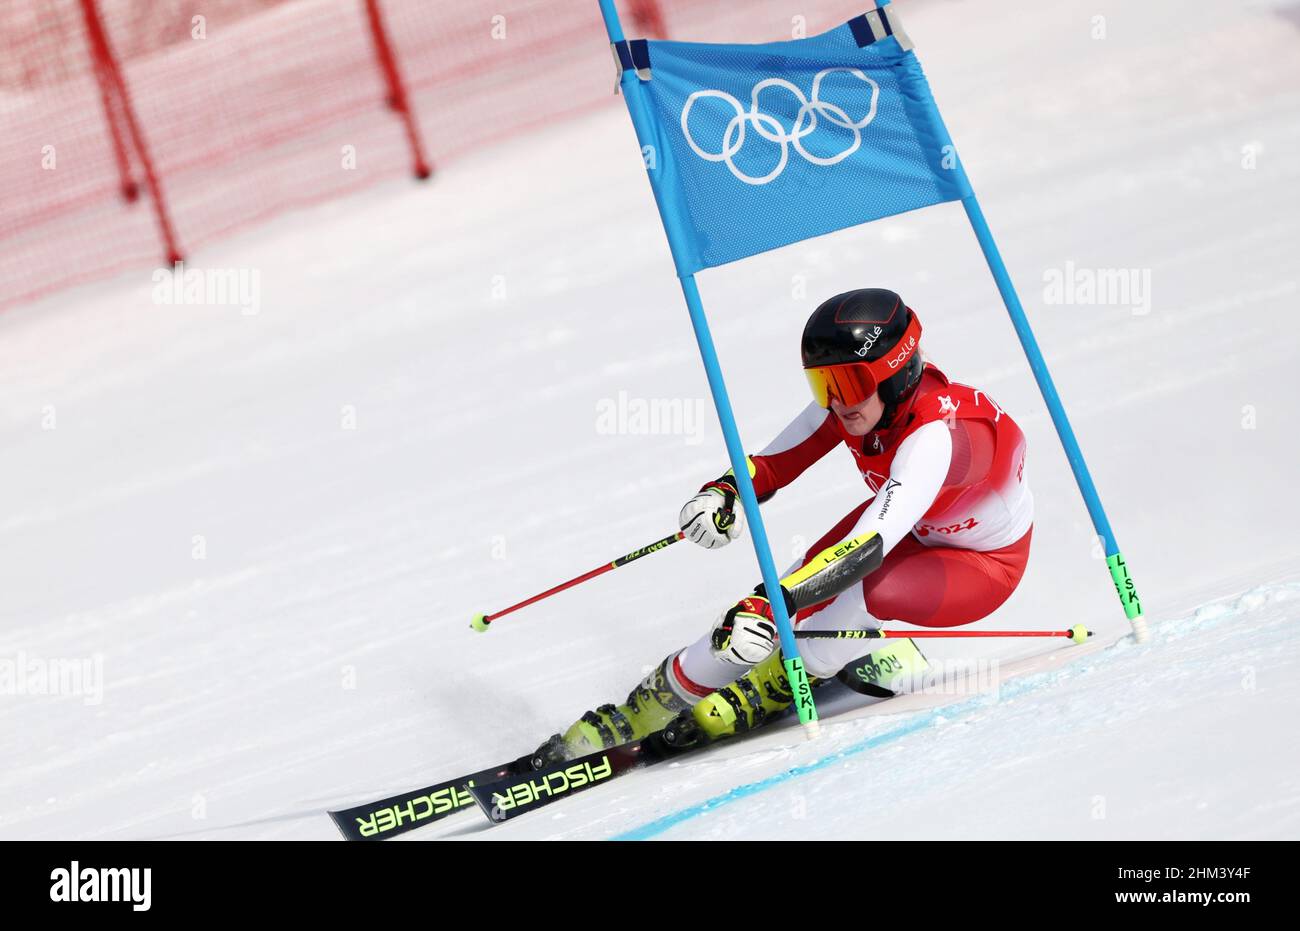 Beijing, China. 7th Feb, 2022. Katharina Truppe of Austria competes during the Alpine Skiing Women's Giant Slalom at the National Alpine Skiing Centre in Yanqing District, Beijing, capital of China, Feb. 7, 2022. Credit: Chen Bin/Xinhua/Alamy Live News Stock Photo